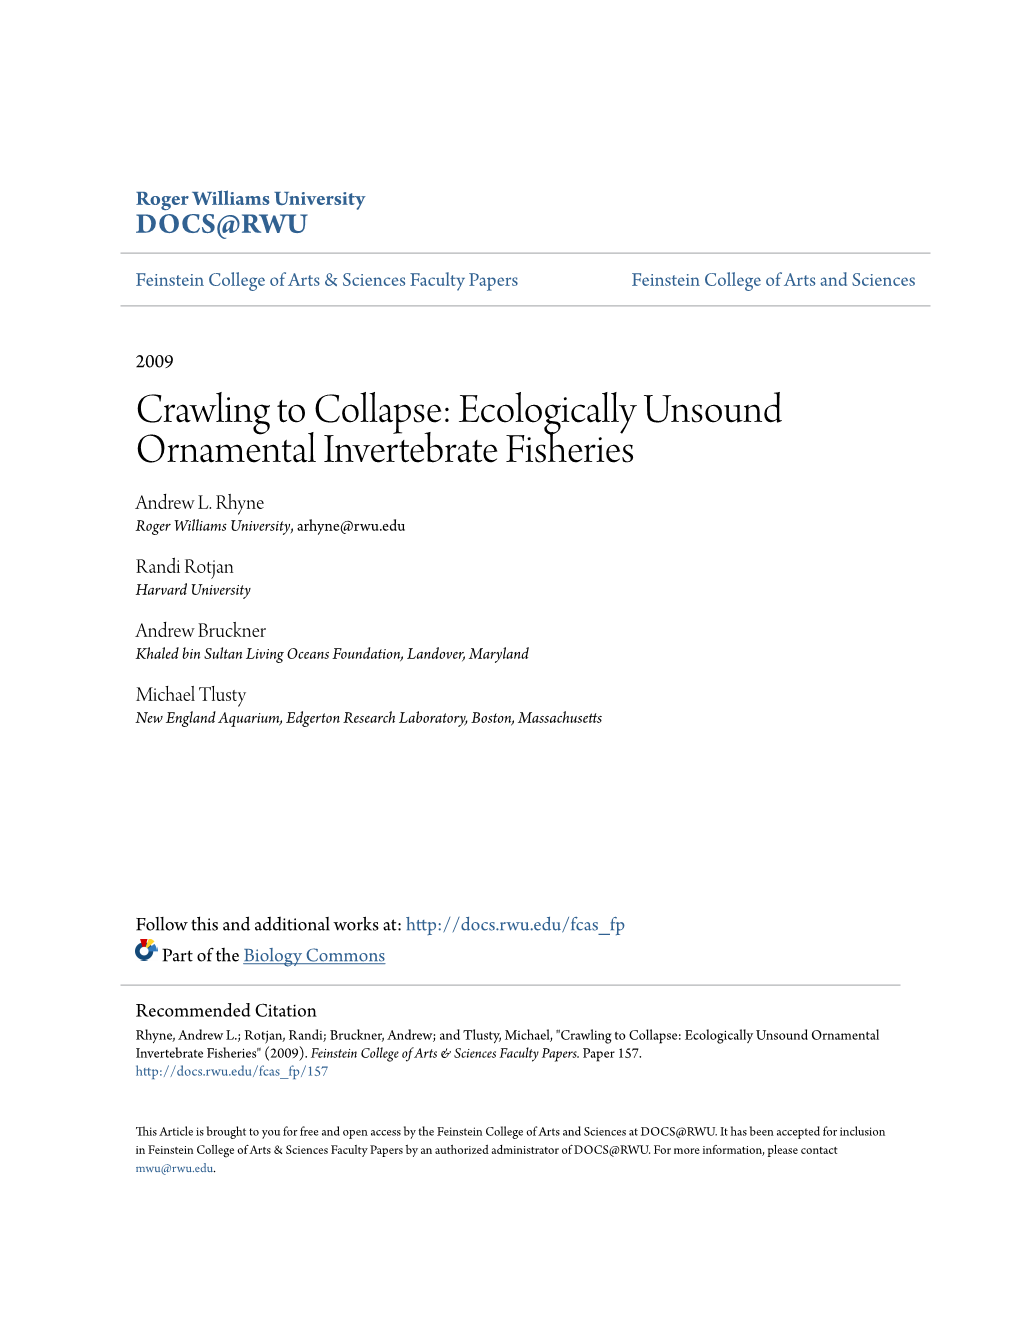 Crawling to Collapse: Ecologically Unsound Ornamental Invertebrate Fisheries Andrew L